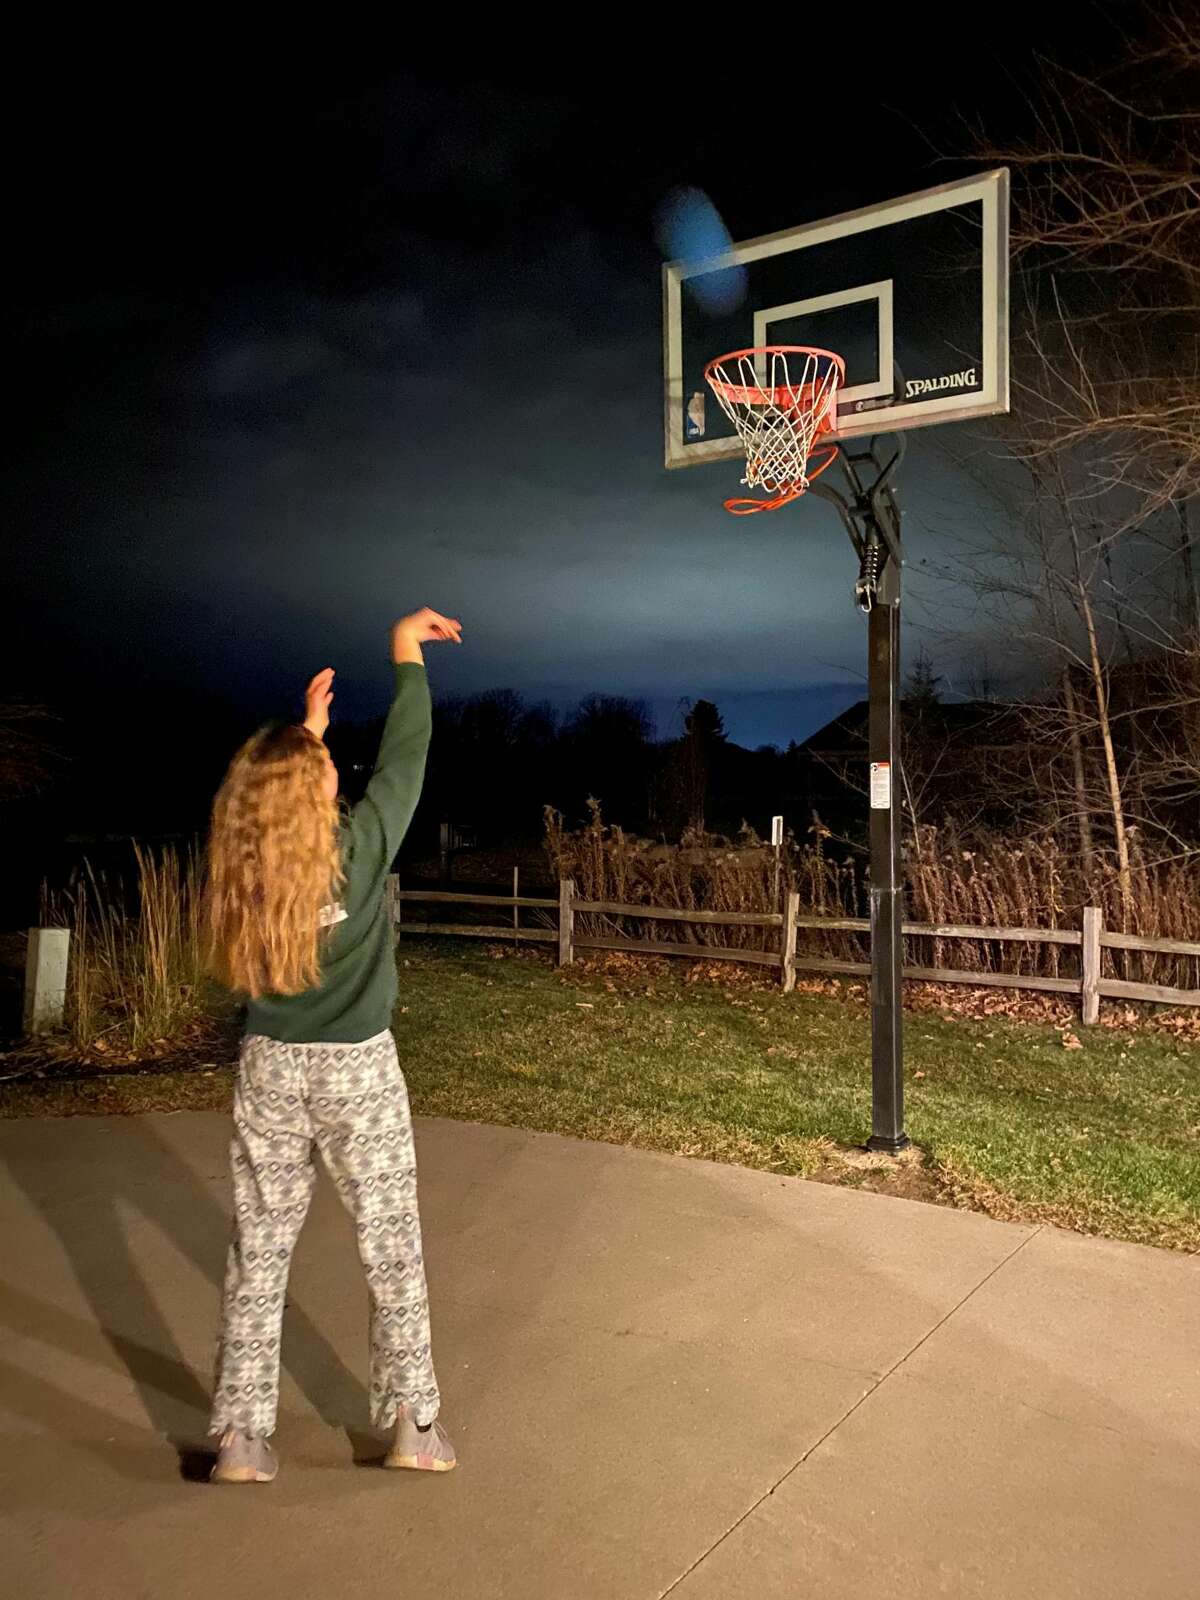 Freeland team co-captain Hannah Niederquell shoots baskets in her driveway late at night as part of a challenge held in honor of former Falcons' coach, the late Tom Zolinski, to commemorate the one-year anniversary of his passing.